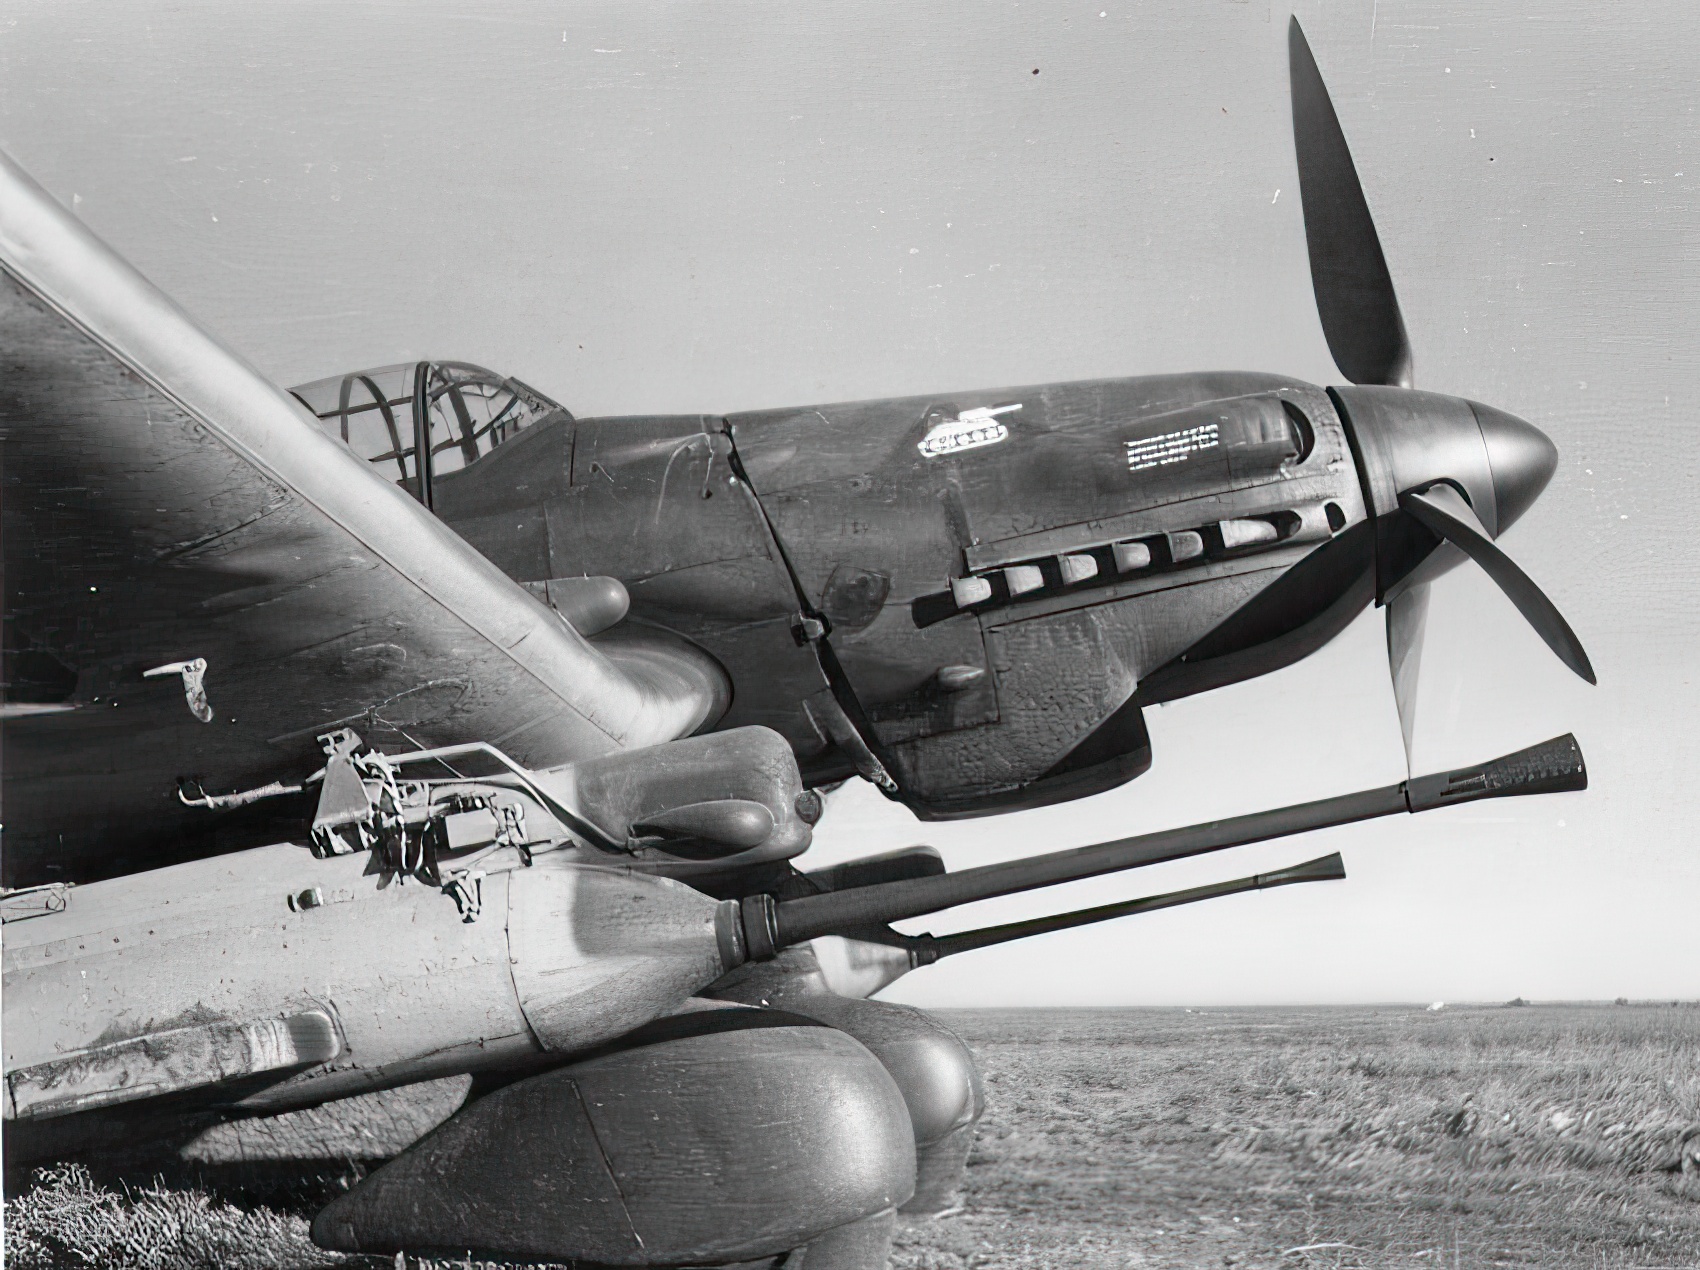 Junkers stuka Ju 87G-1 "Tank buster" anti-tank aircraft, fitted with two 3.7cm high velocity automatic cannon